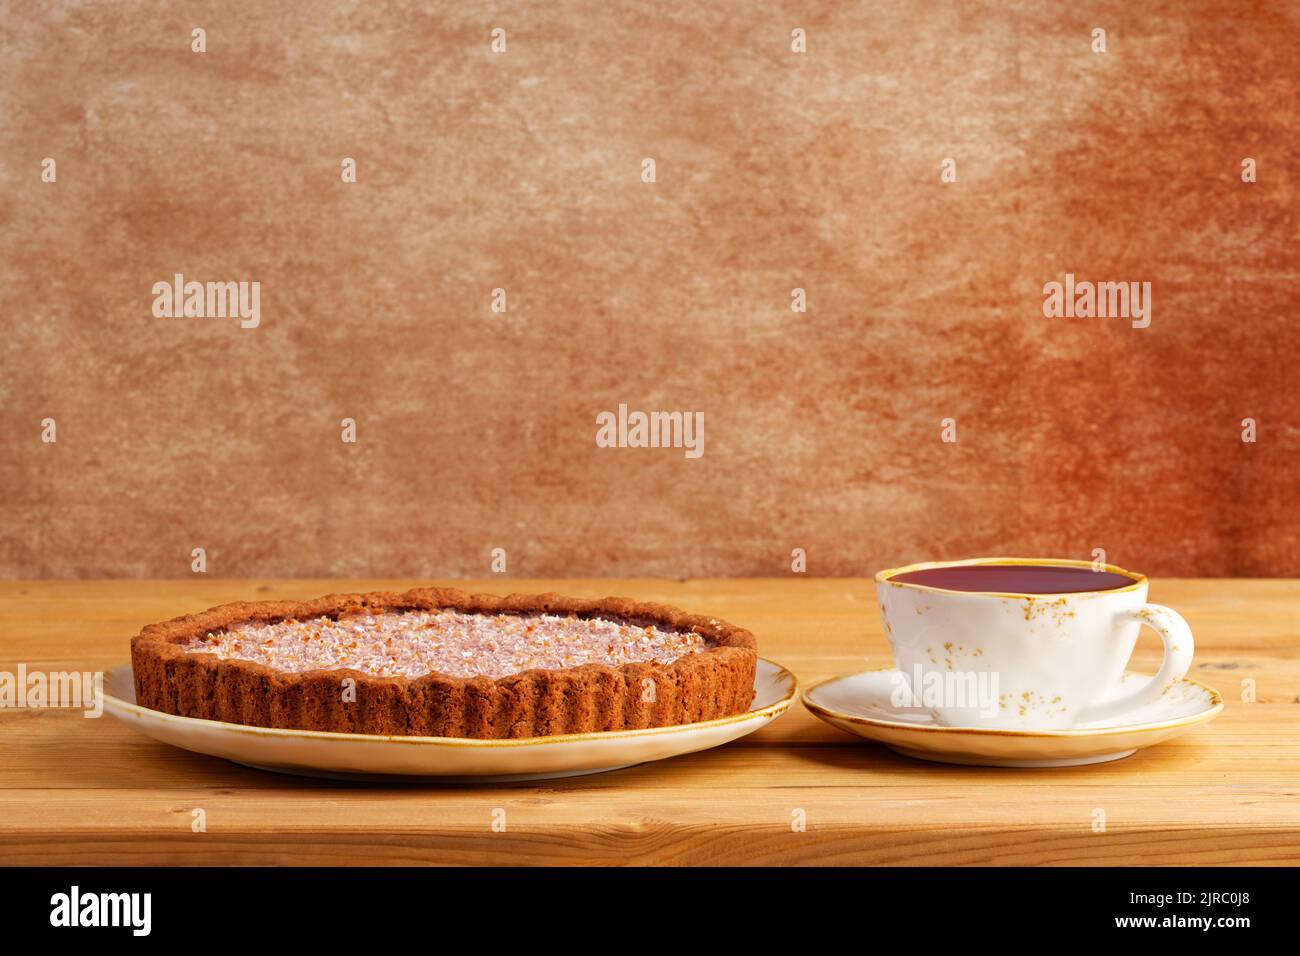 Homemade raspberry and banana pie and cup of tea on wooden table. Copyspace. Stock Photo